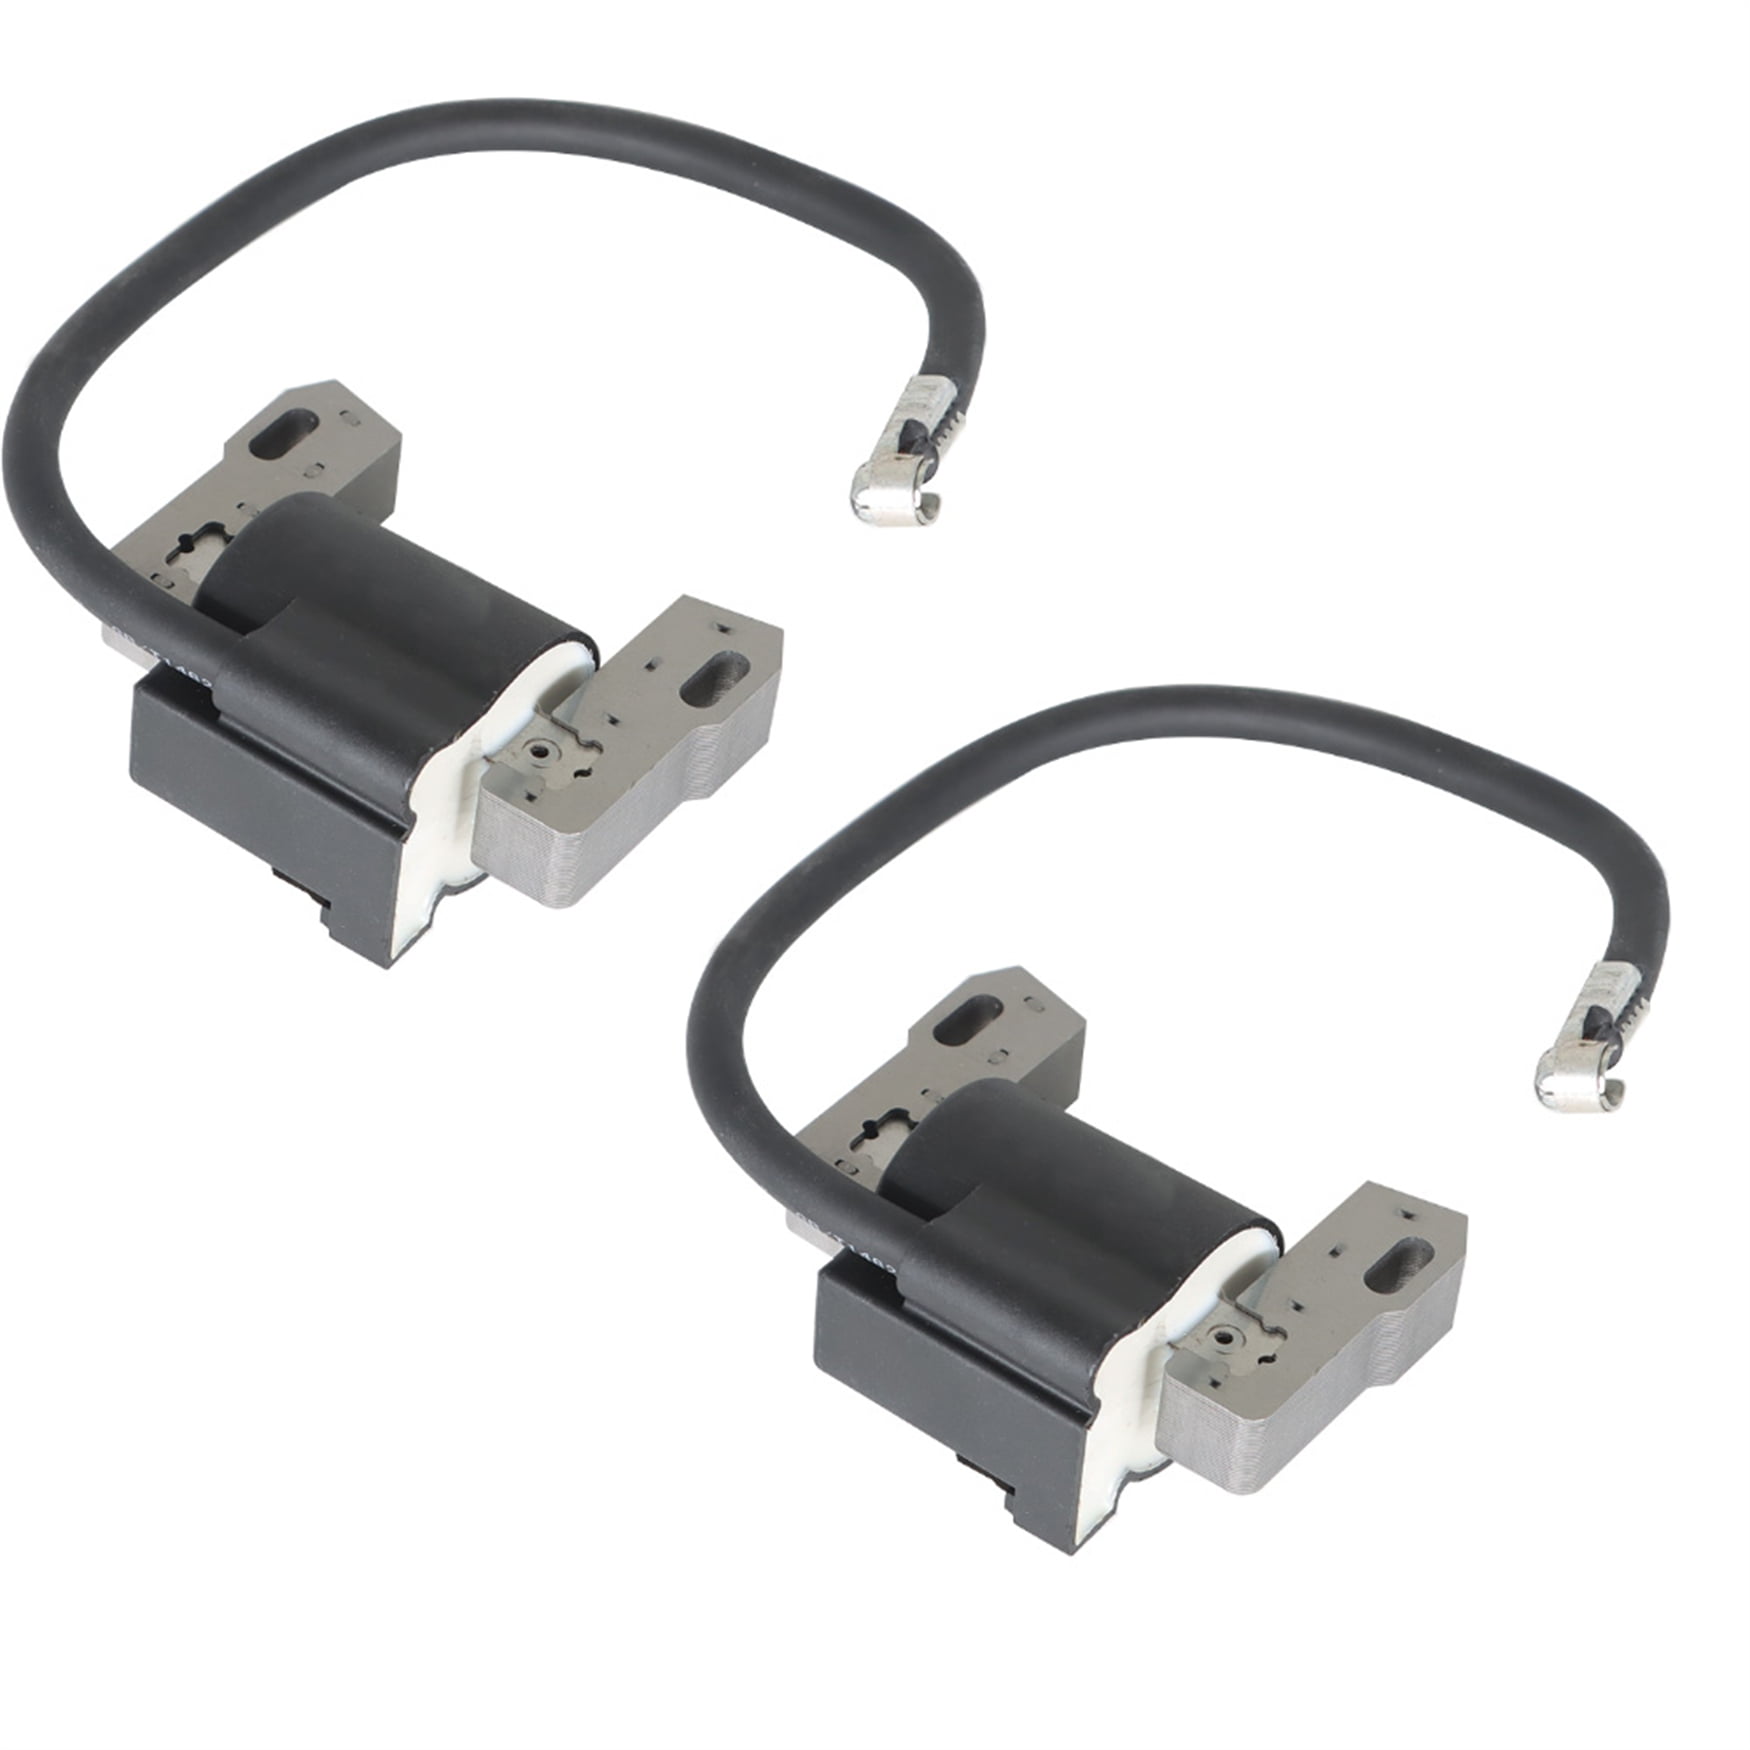 2 Pack 592846 691060 Ignition Coil Replacement for Briggs & Stratton 799651  499447 404577 405577 405777 407777 40H777 445777 446977 40G777 543477